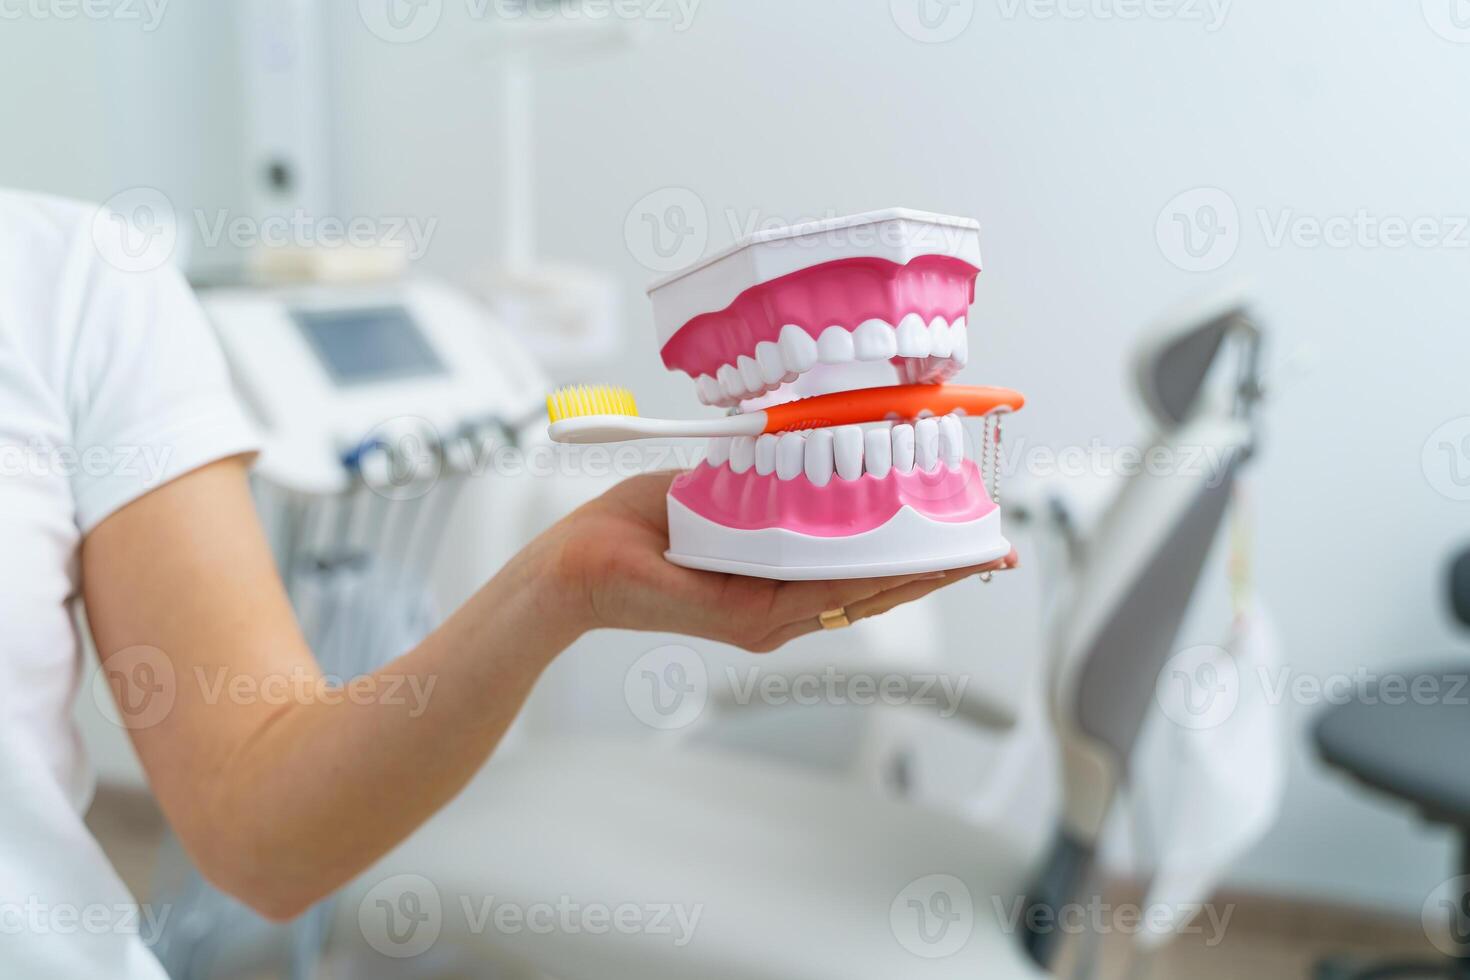 Doctor shows on a plastic jaw sample or model different methods of teeth treatment. Modern dental clinic background. Pink medical gloves on doctor's hands. Tooth brush in jaw. photo